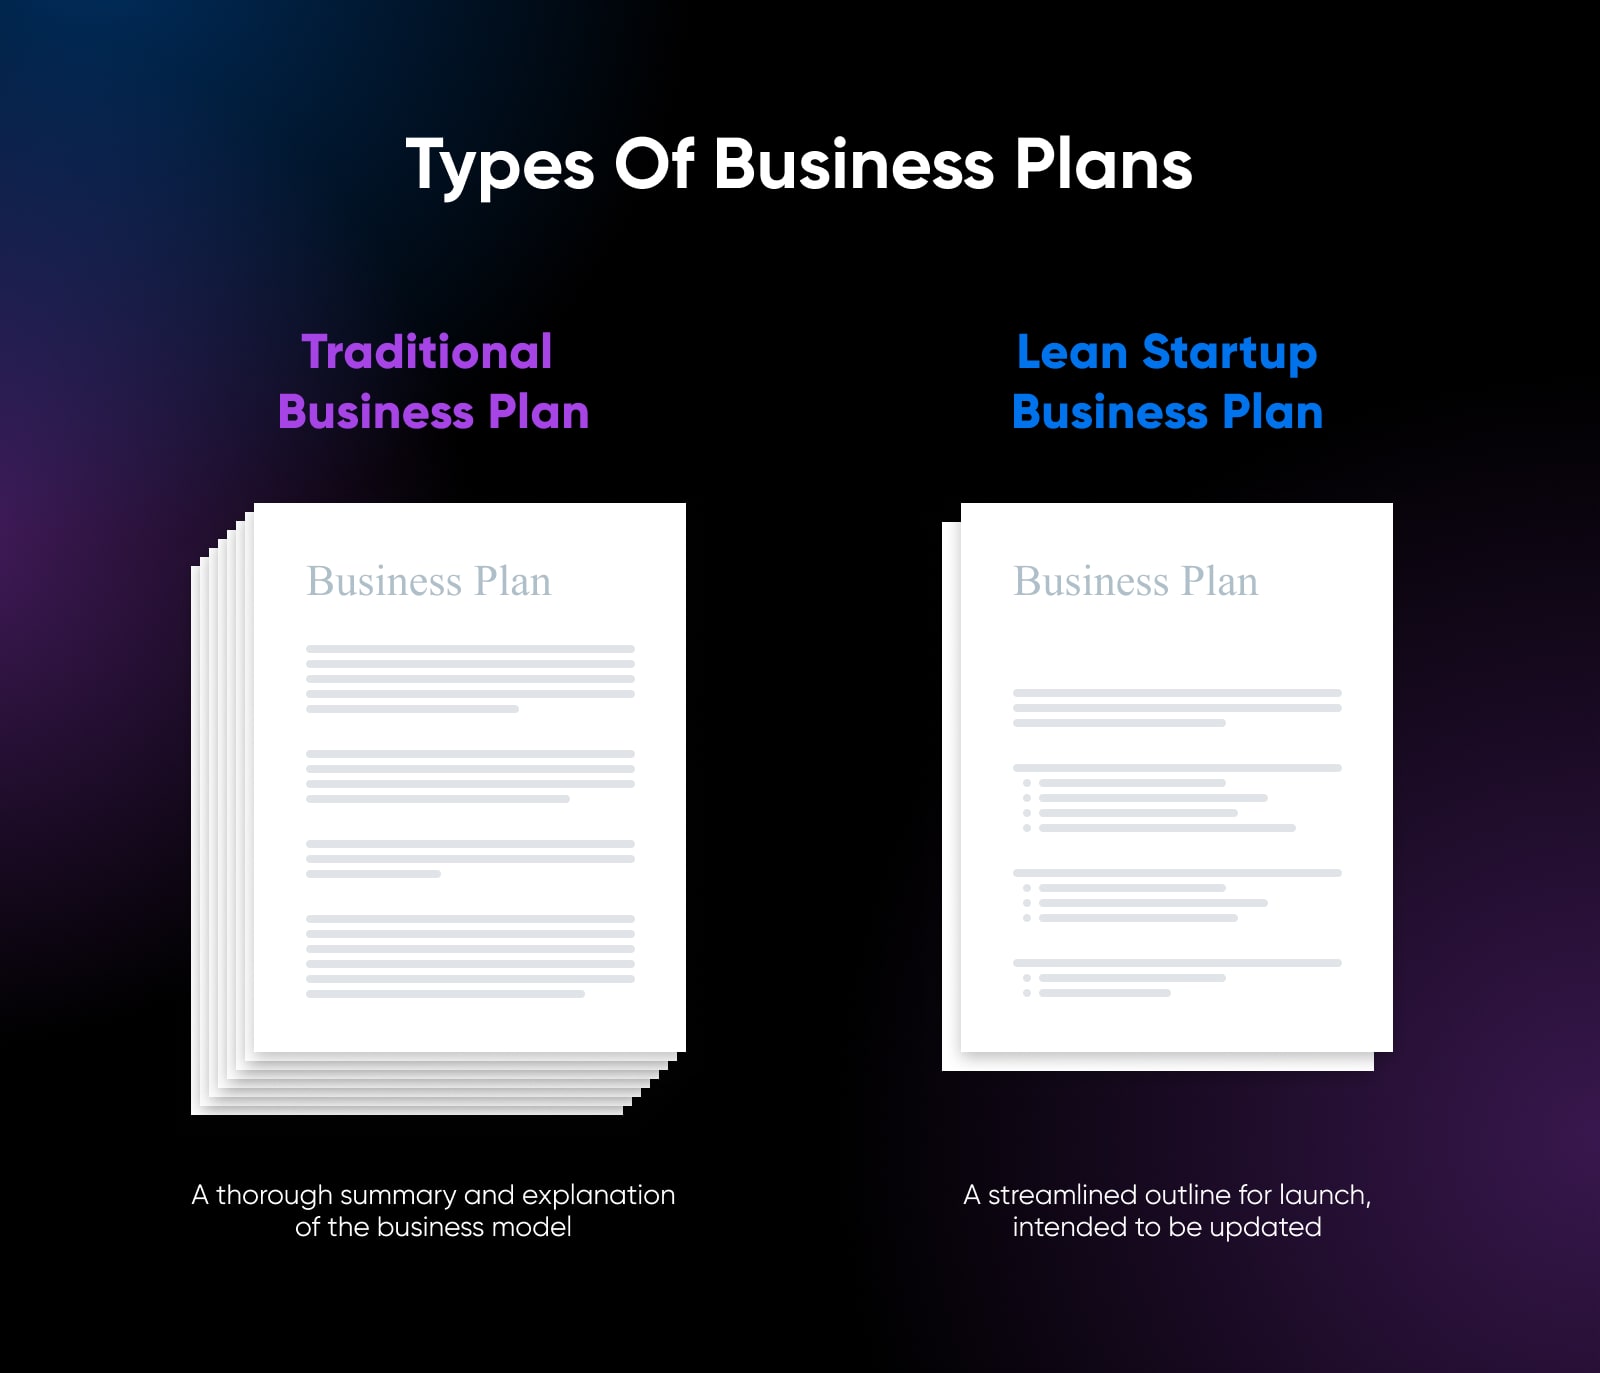 "Types of Business Plans" diagram with two stacks of papers: "Traditional Business Plan" and "Lean Startup Business Plan."